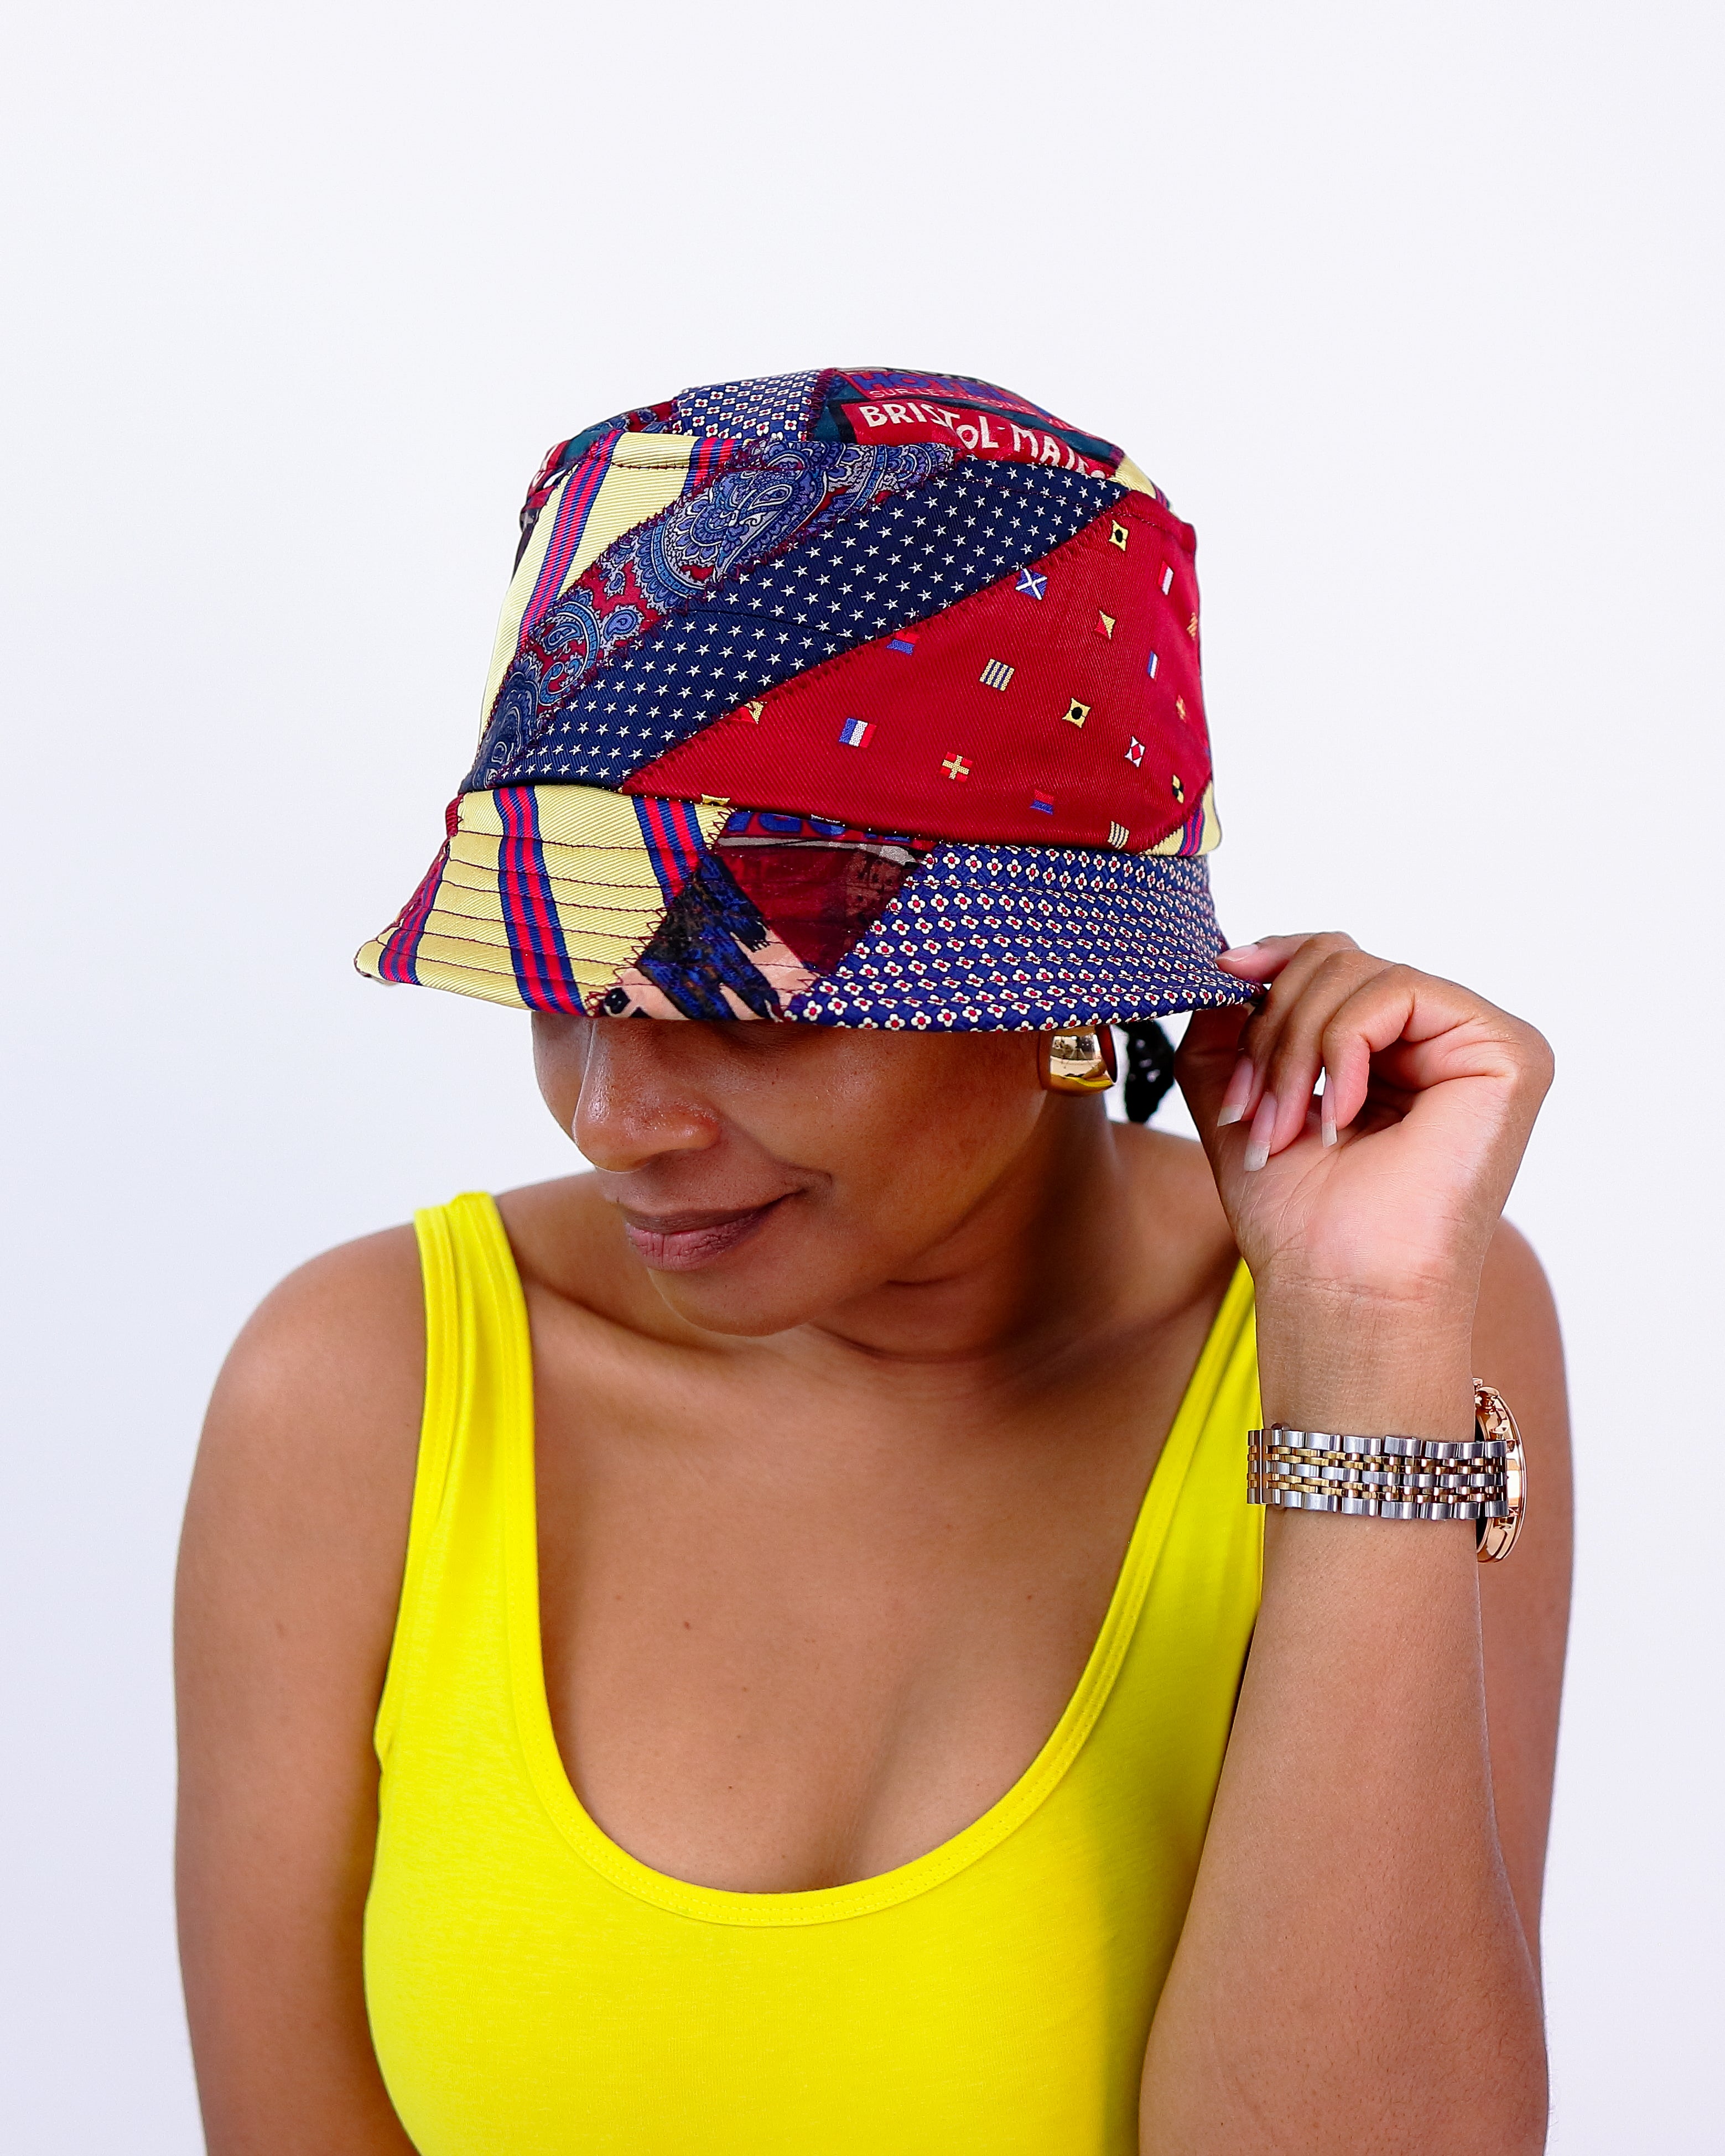 Red & Yellow World Travel Upcycled Tie Bucket Hat